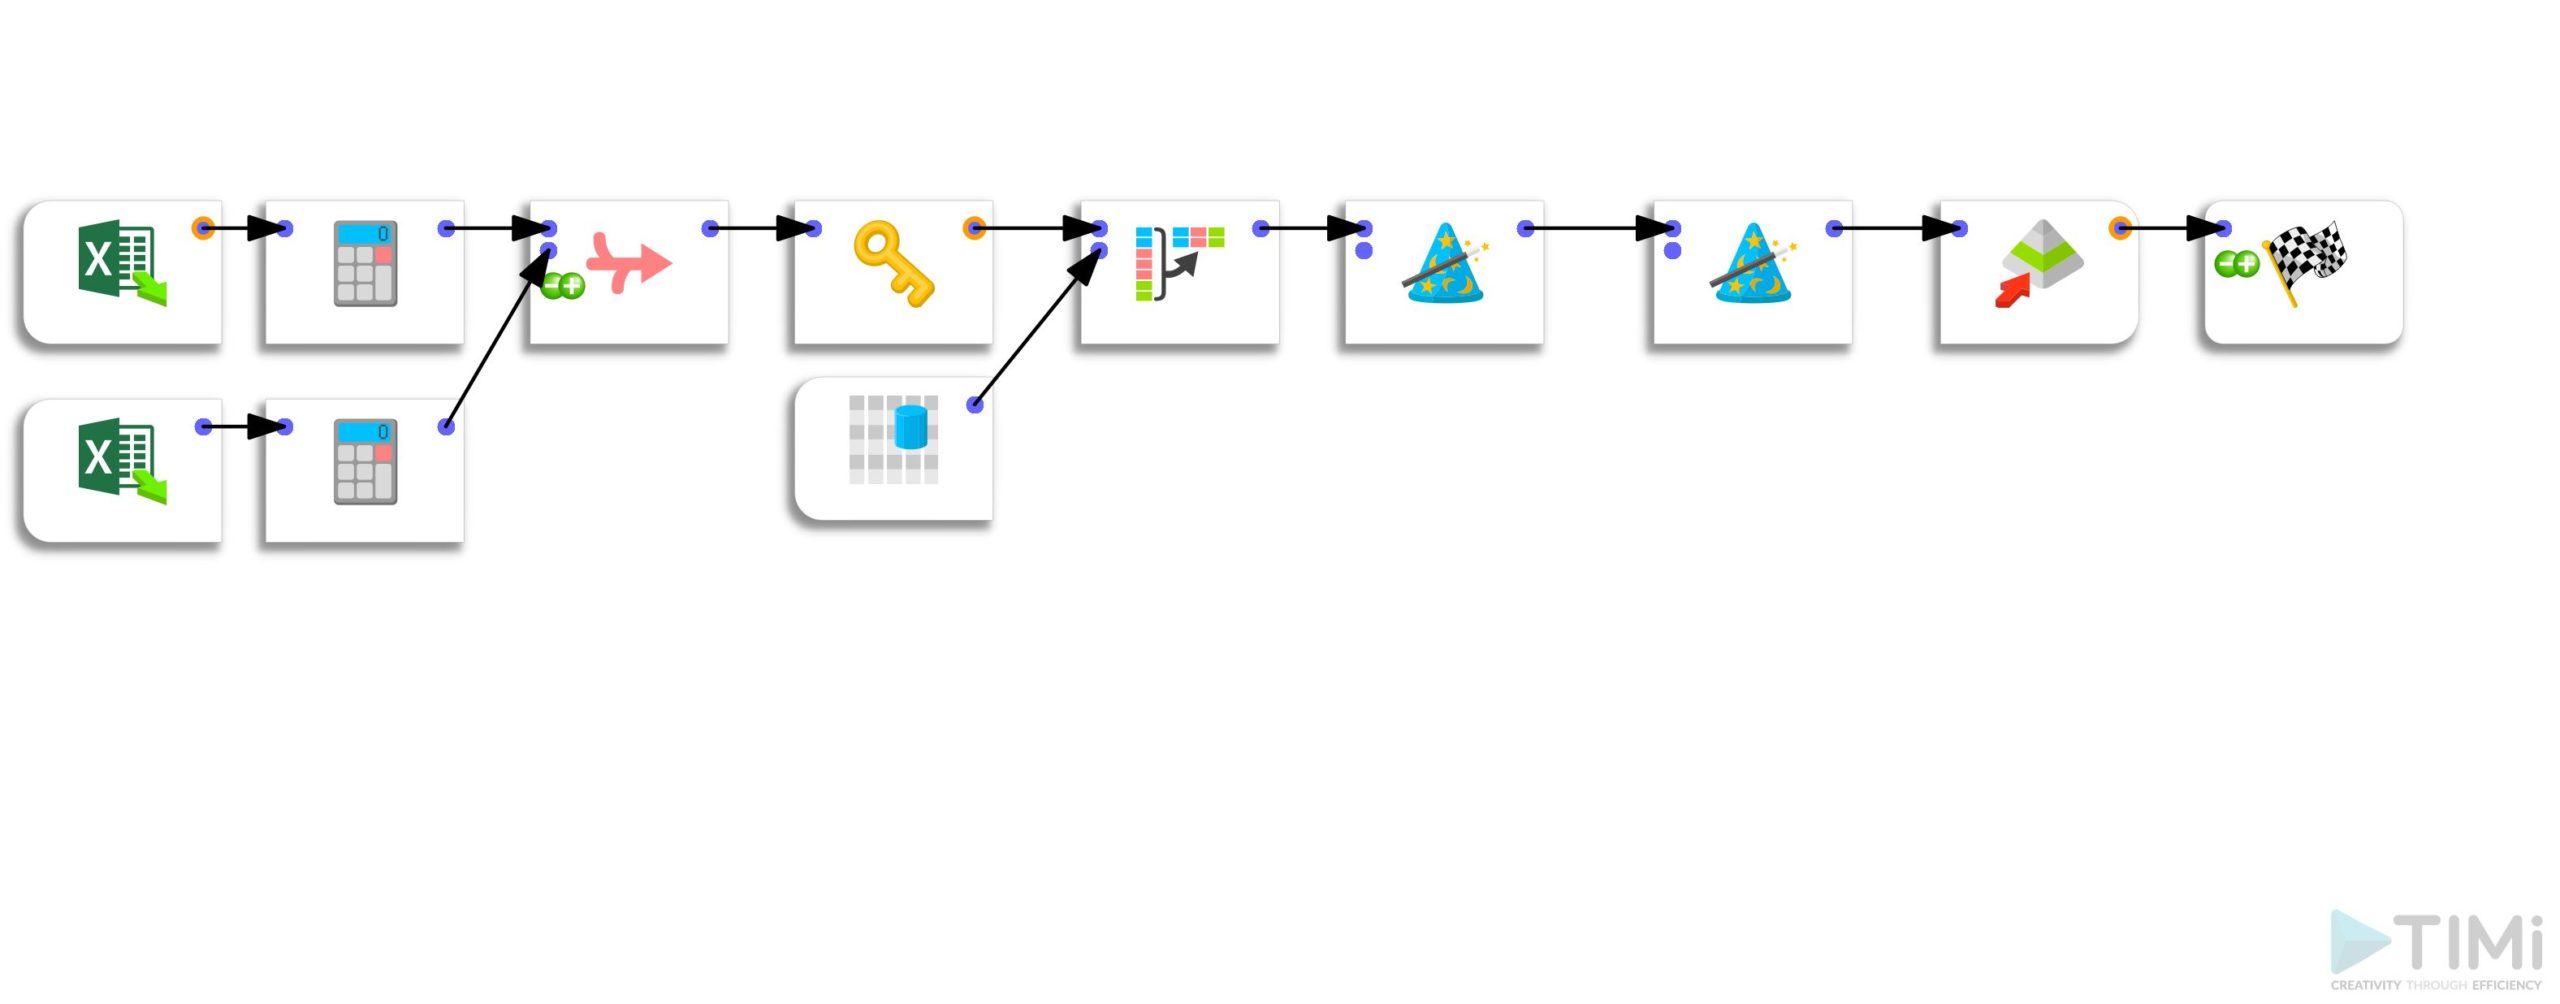 Data extraction pipeline using Anatella. The input files are .xlsx, and the output is a .gel file.